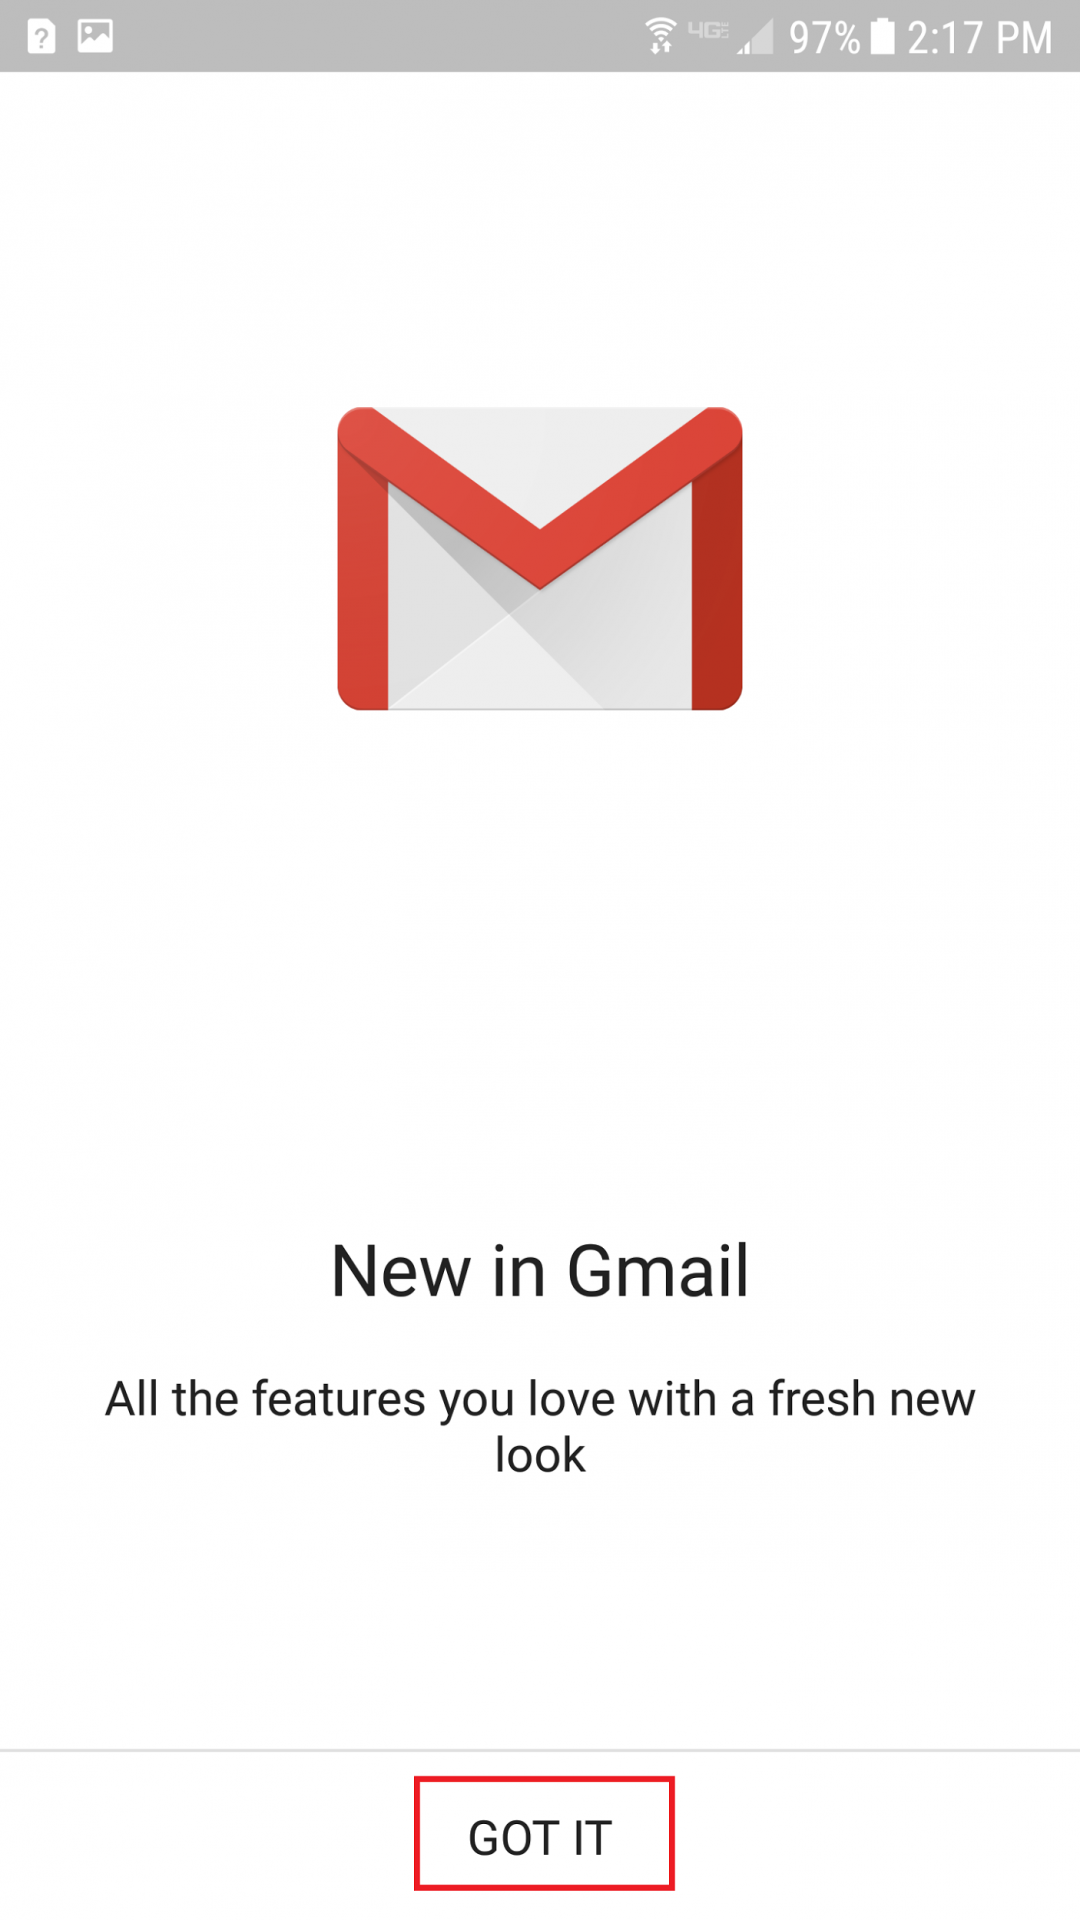 New in Gmail screen with GOT IT button circled